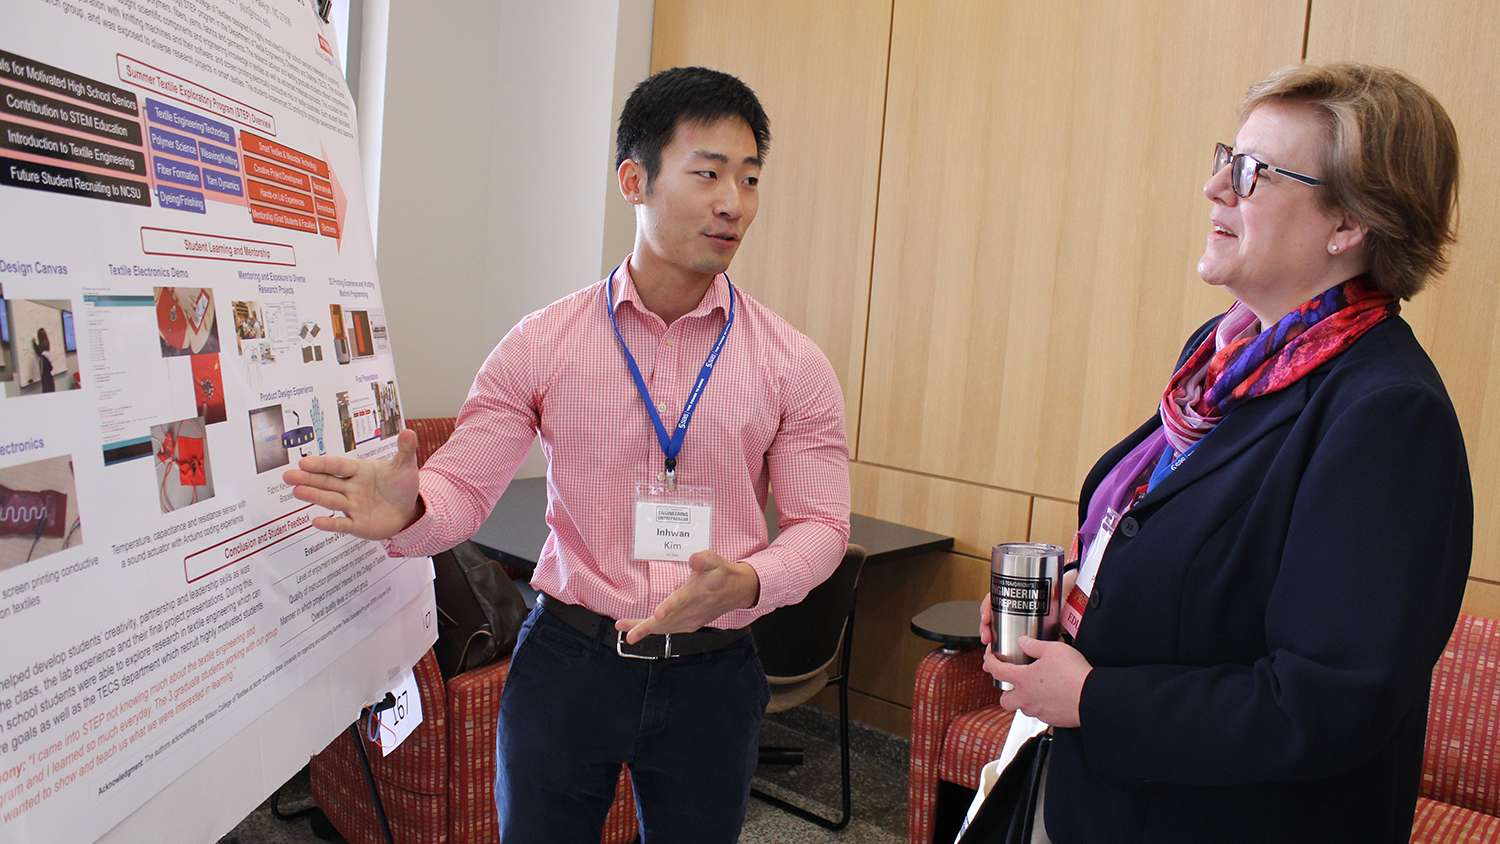 Inhwan Kim talks to Dr. Sally Pardue, ASEE-SE section president.